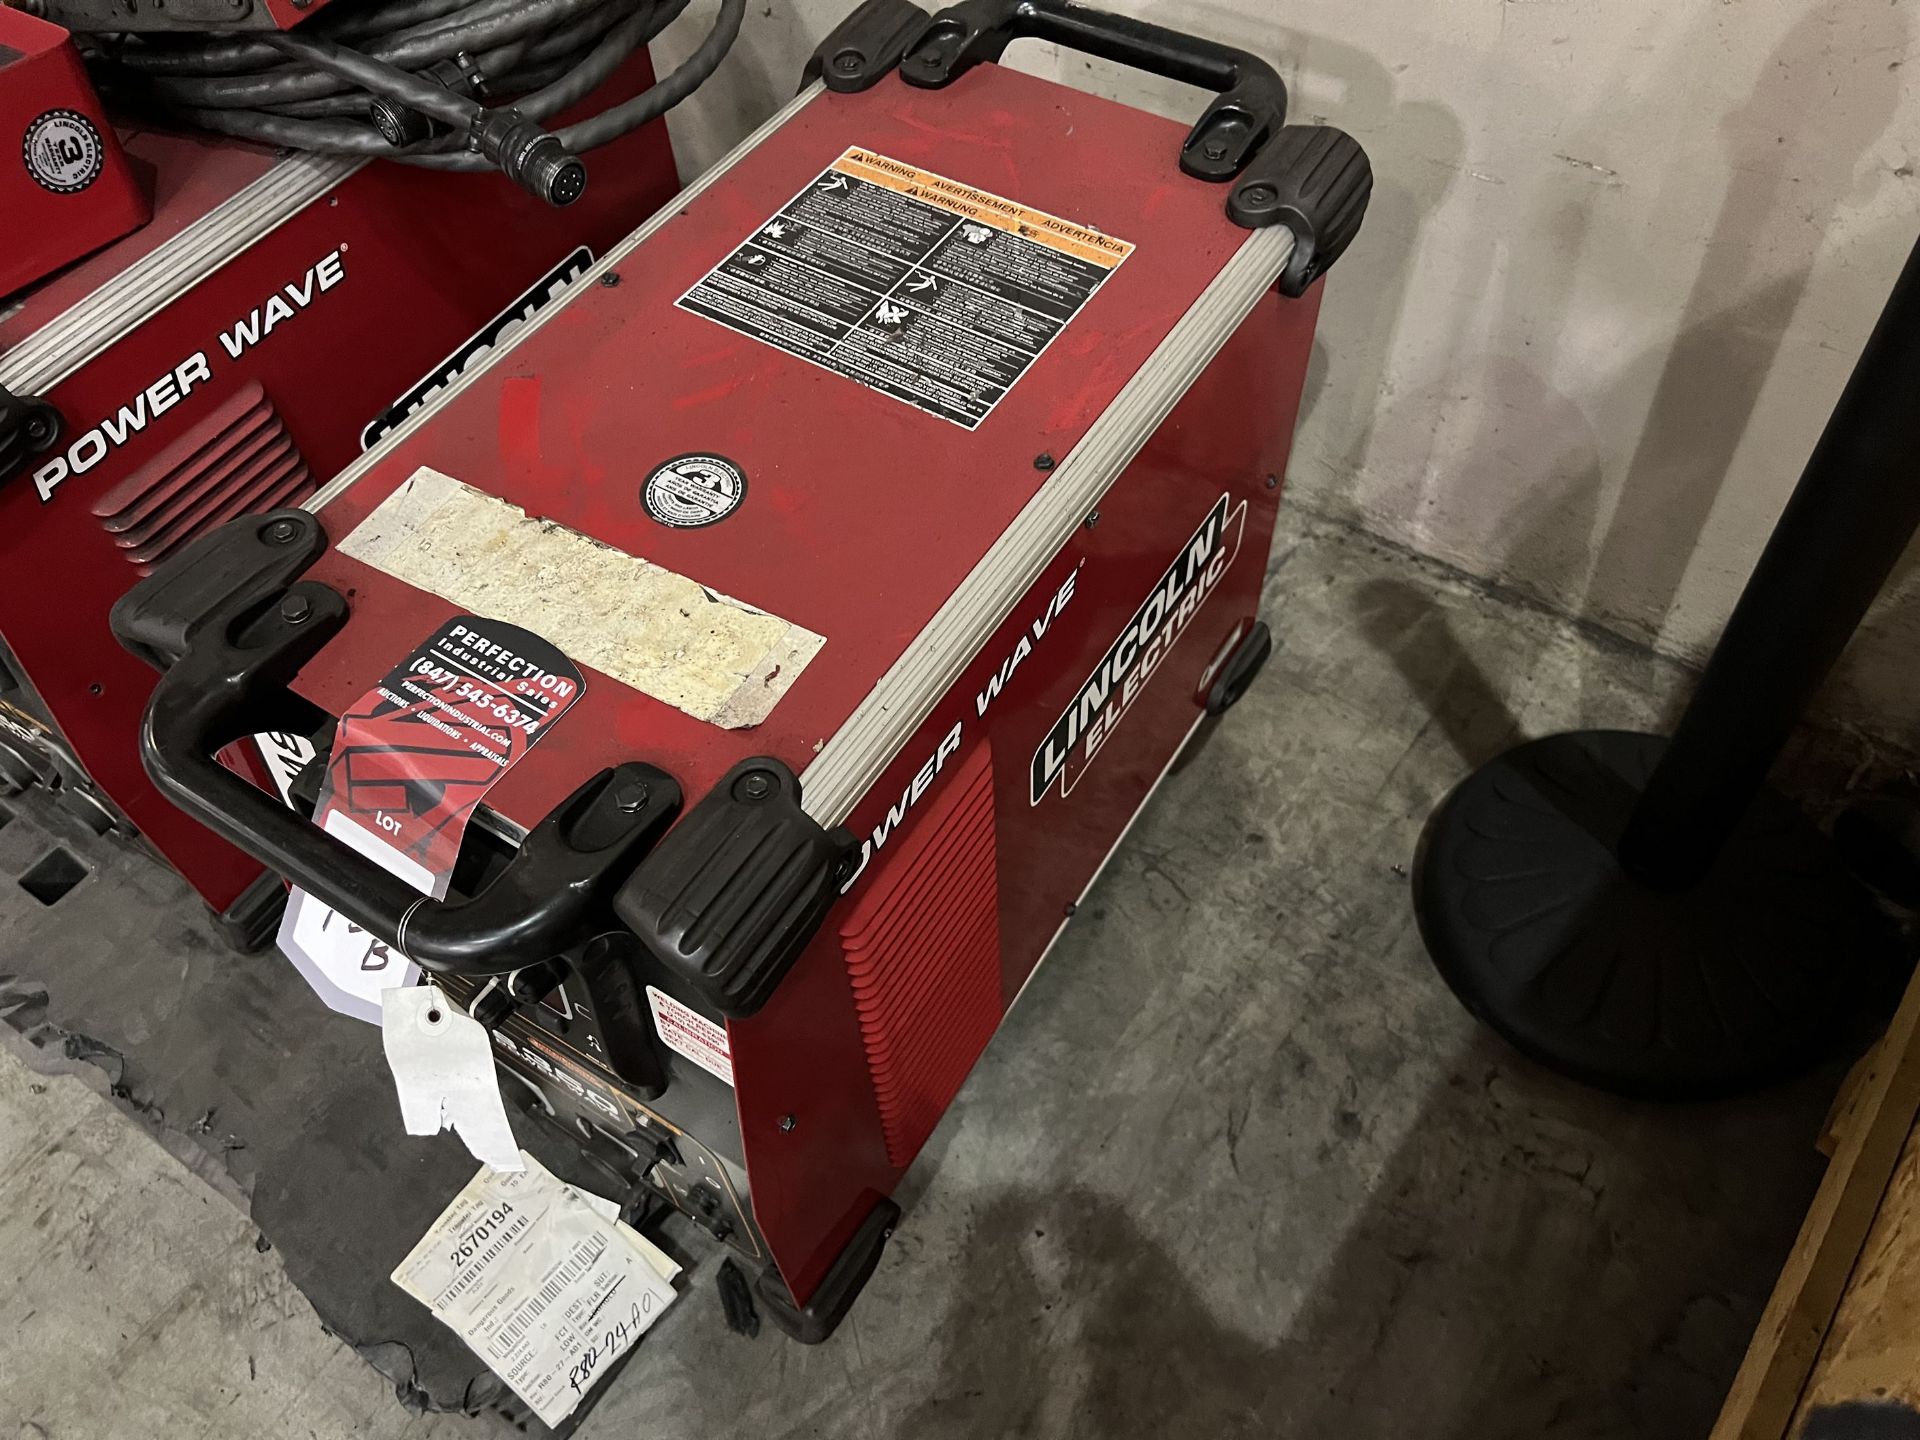 Lincoln S350 Power Wave Welder s/n U1150110399 (Located at 7300 Lone Tree Rd, Victoria, TX 77905) - Image 2 of 3